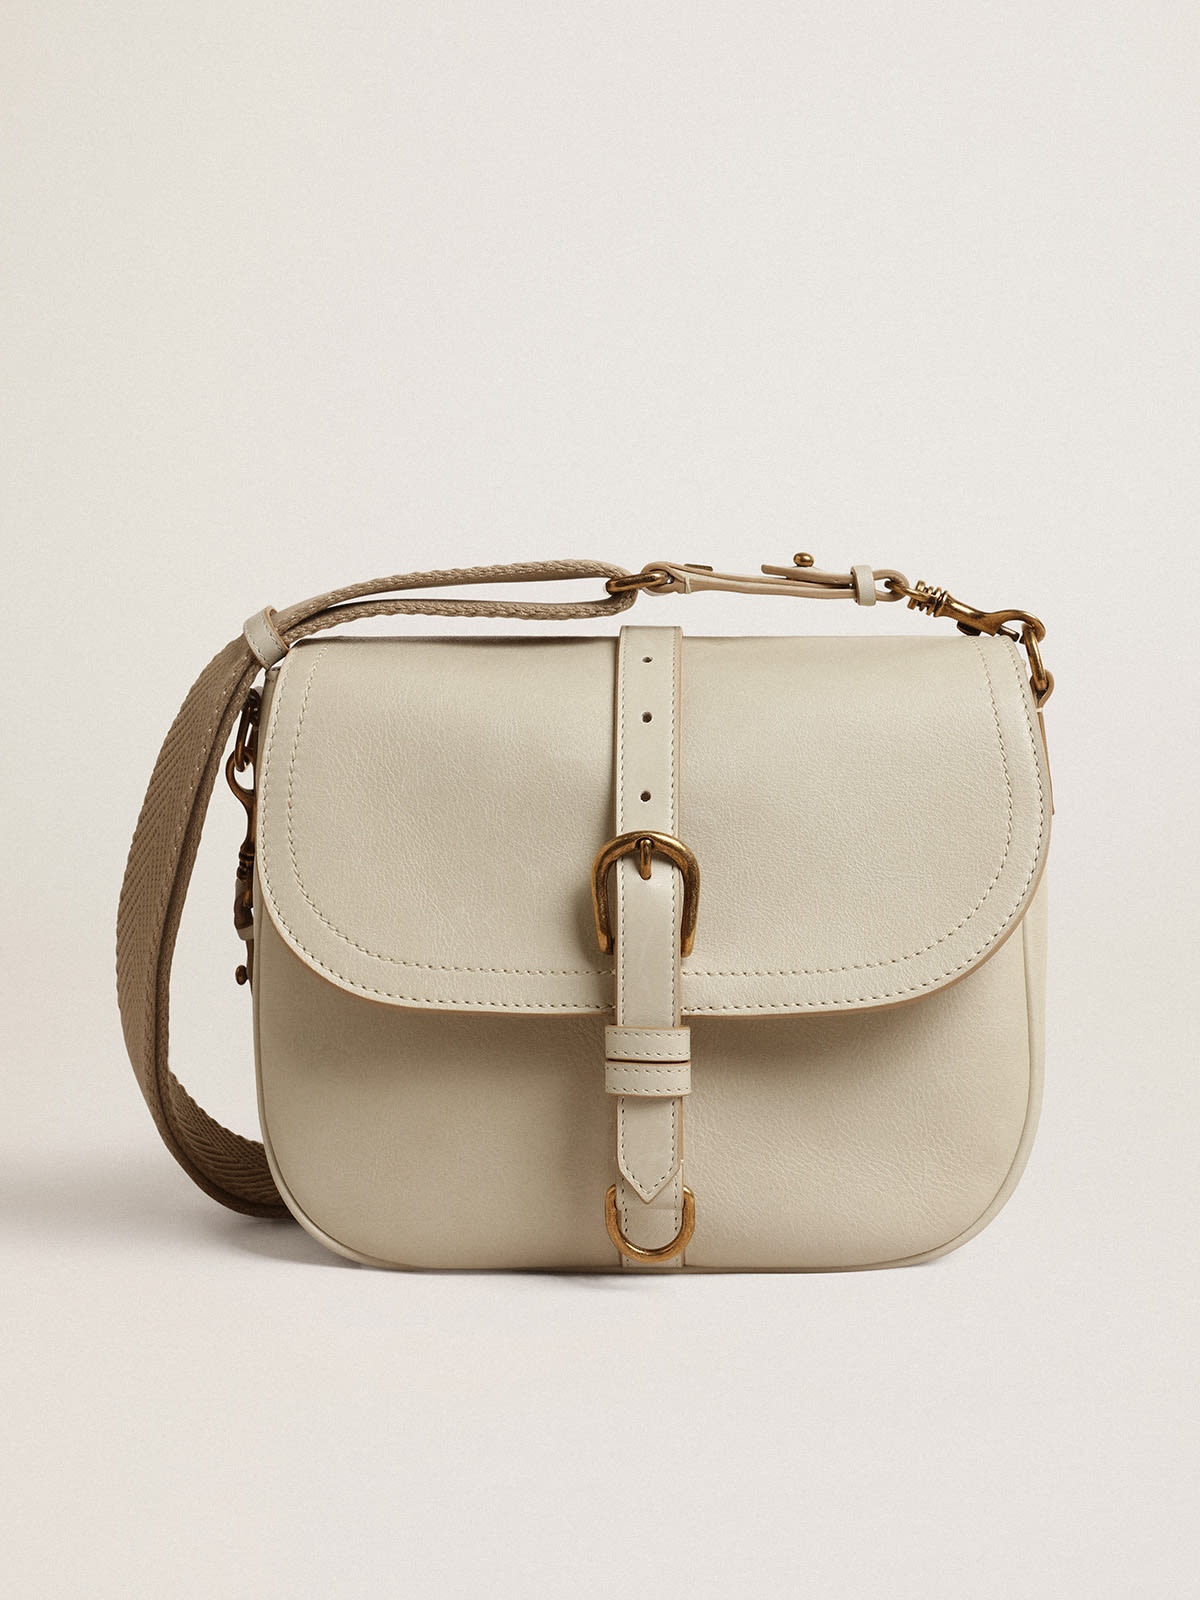 Medium Sally Bag in porcelain leather with buckle and contrasting shoulder strap - 1